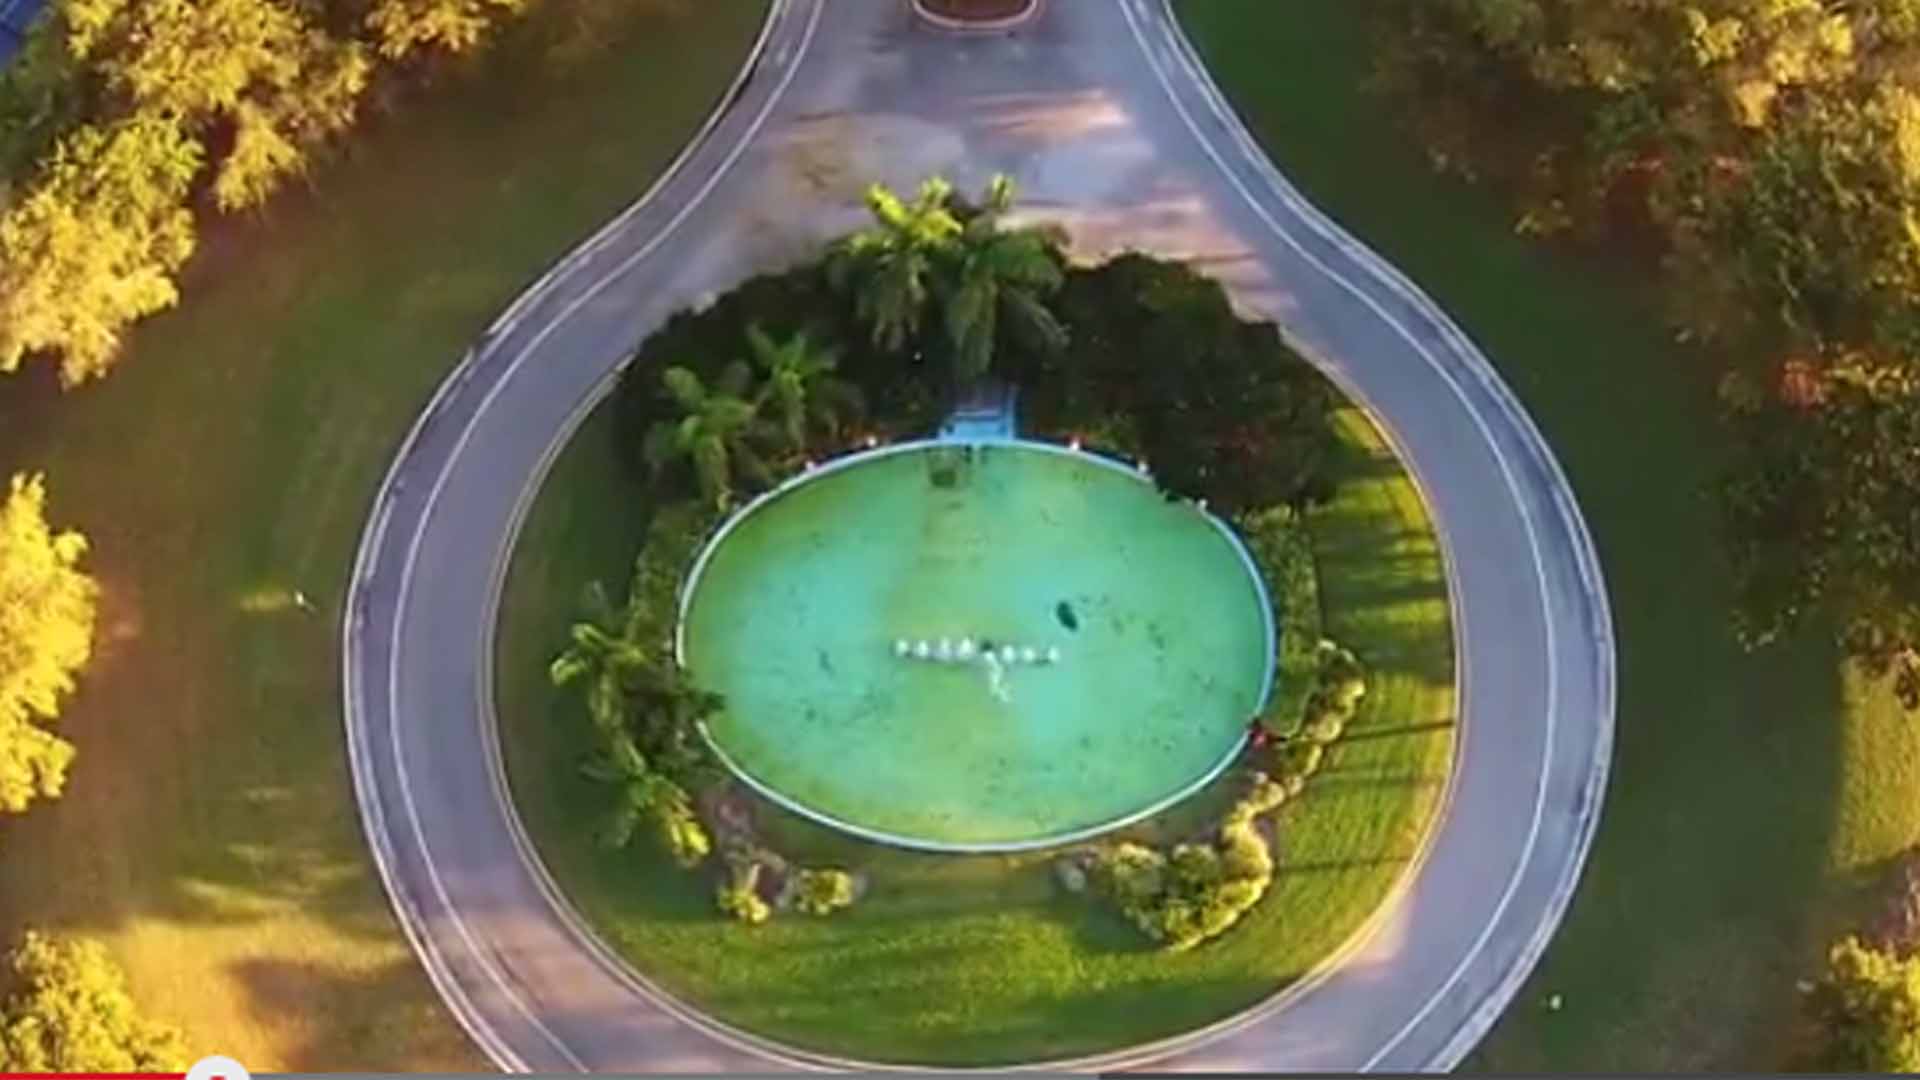 Broken Woodlands Country Club Fountain Being Refurbished by City